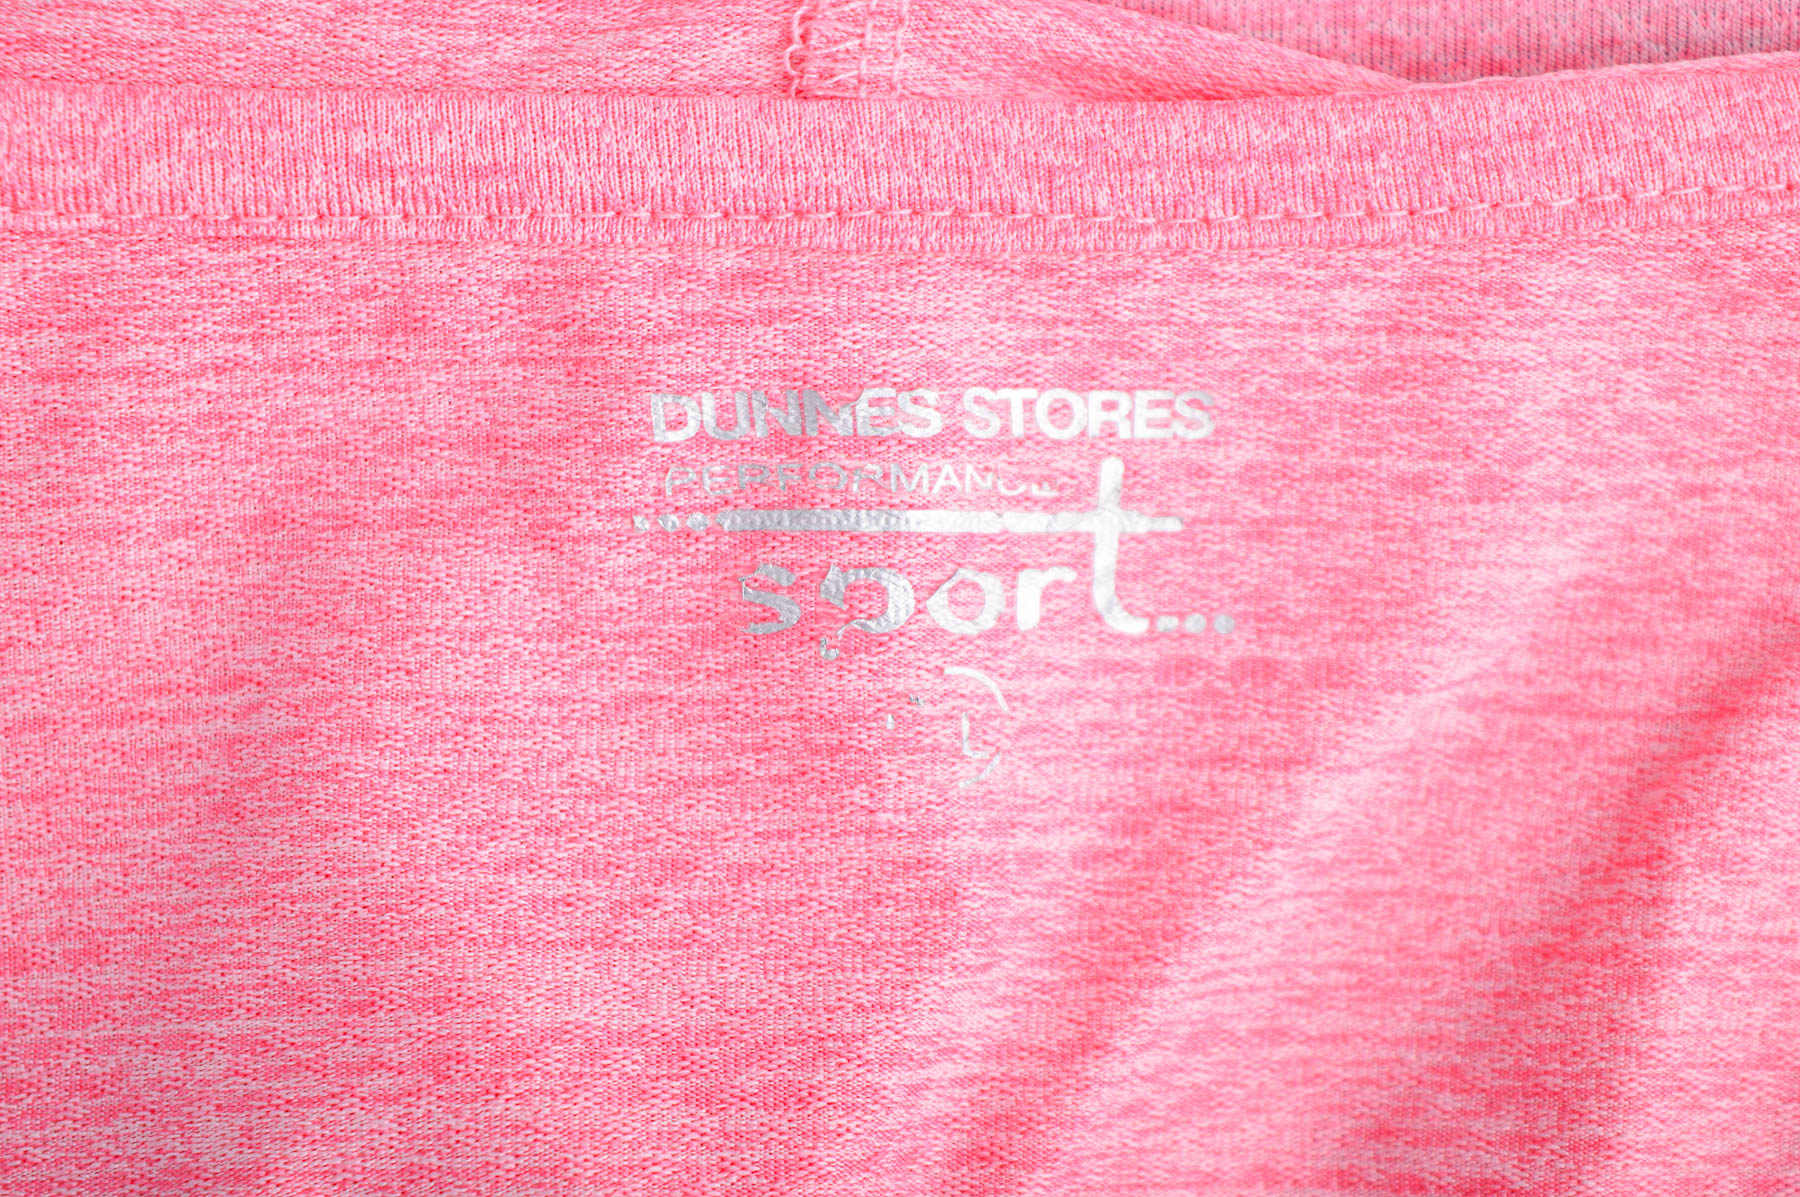 Female sports top - Dunnes Stores Sport - 2